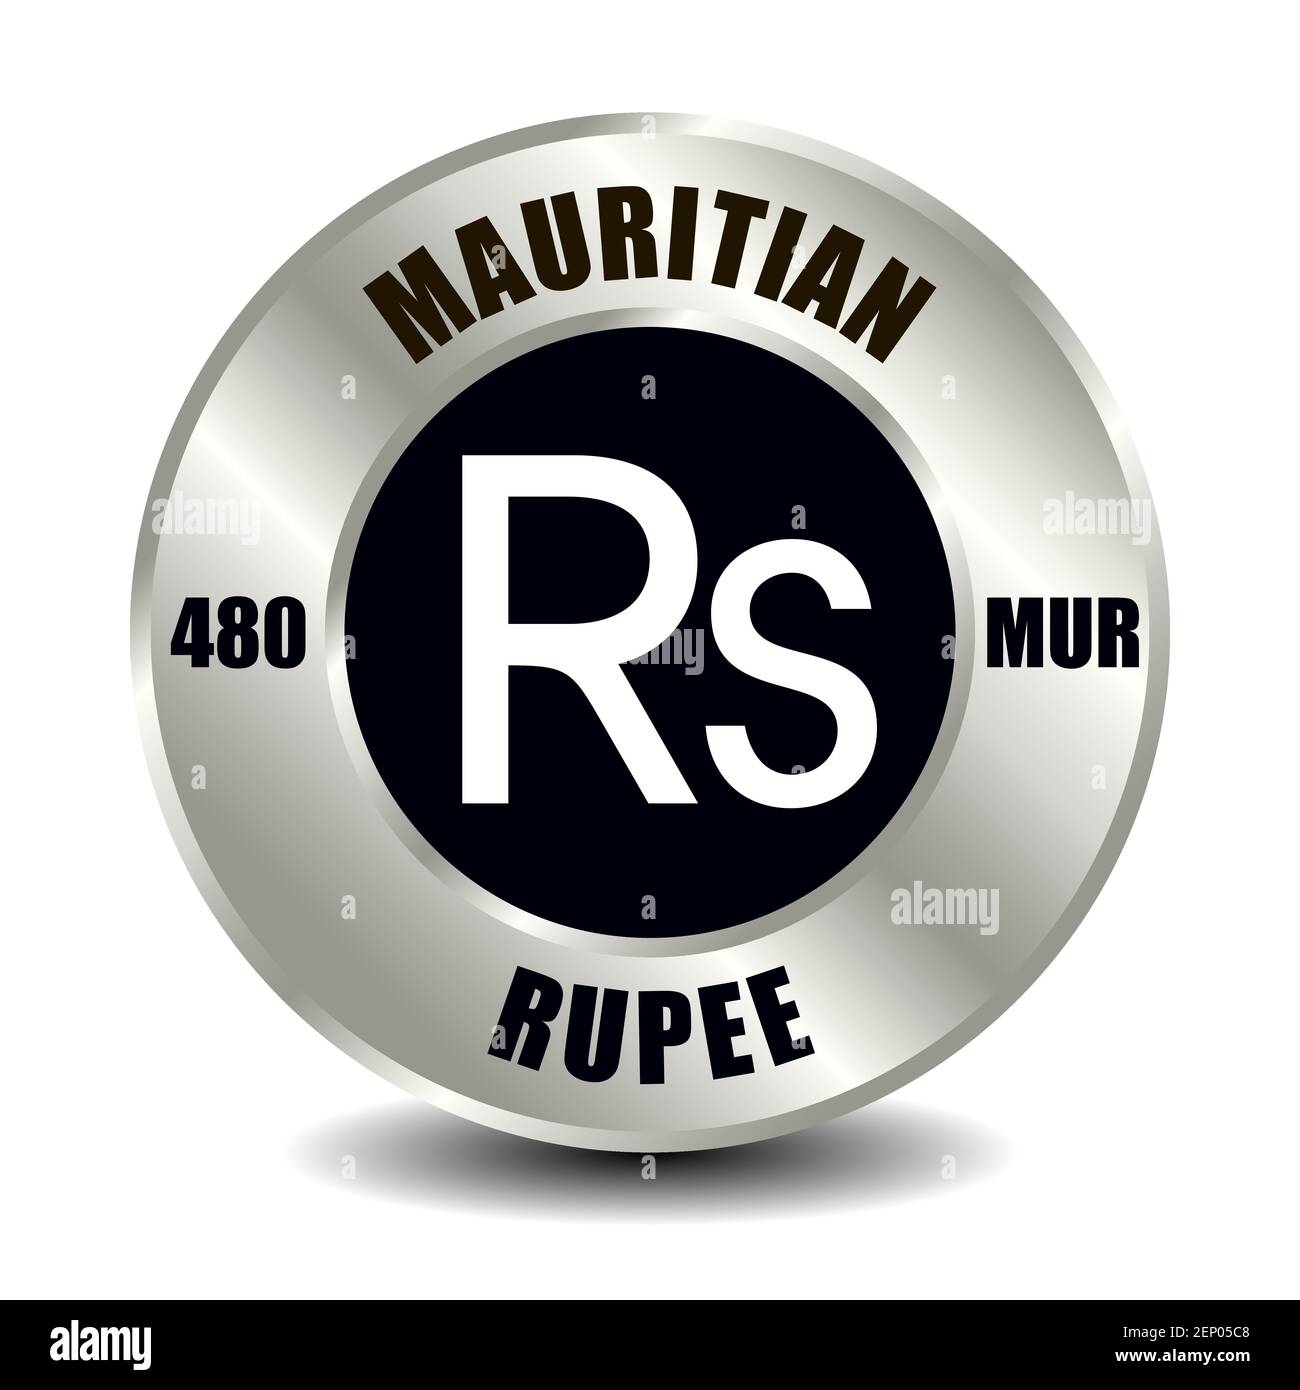 Mauritius money icon isolated on round silver coin. Vector sign of currency symbol with international ISO code and abbreviation Stock Vector